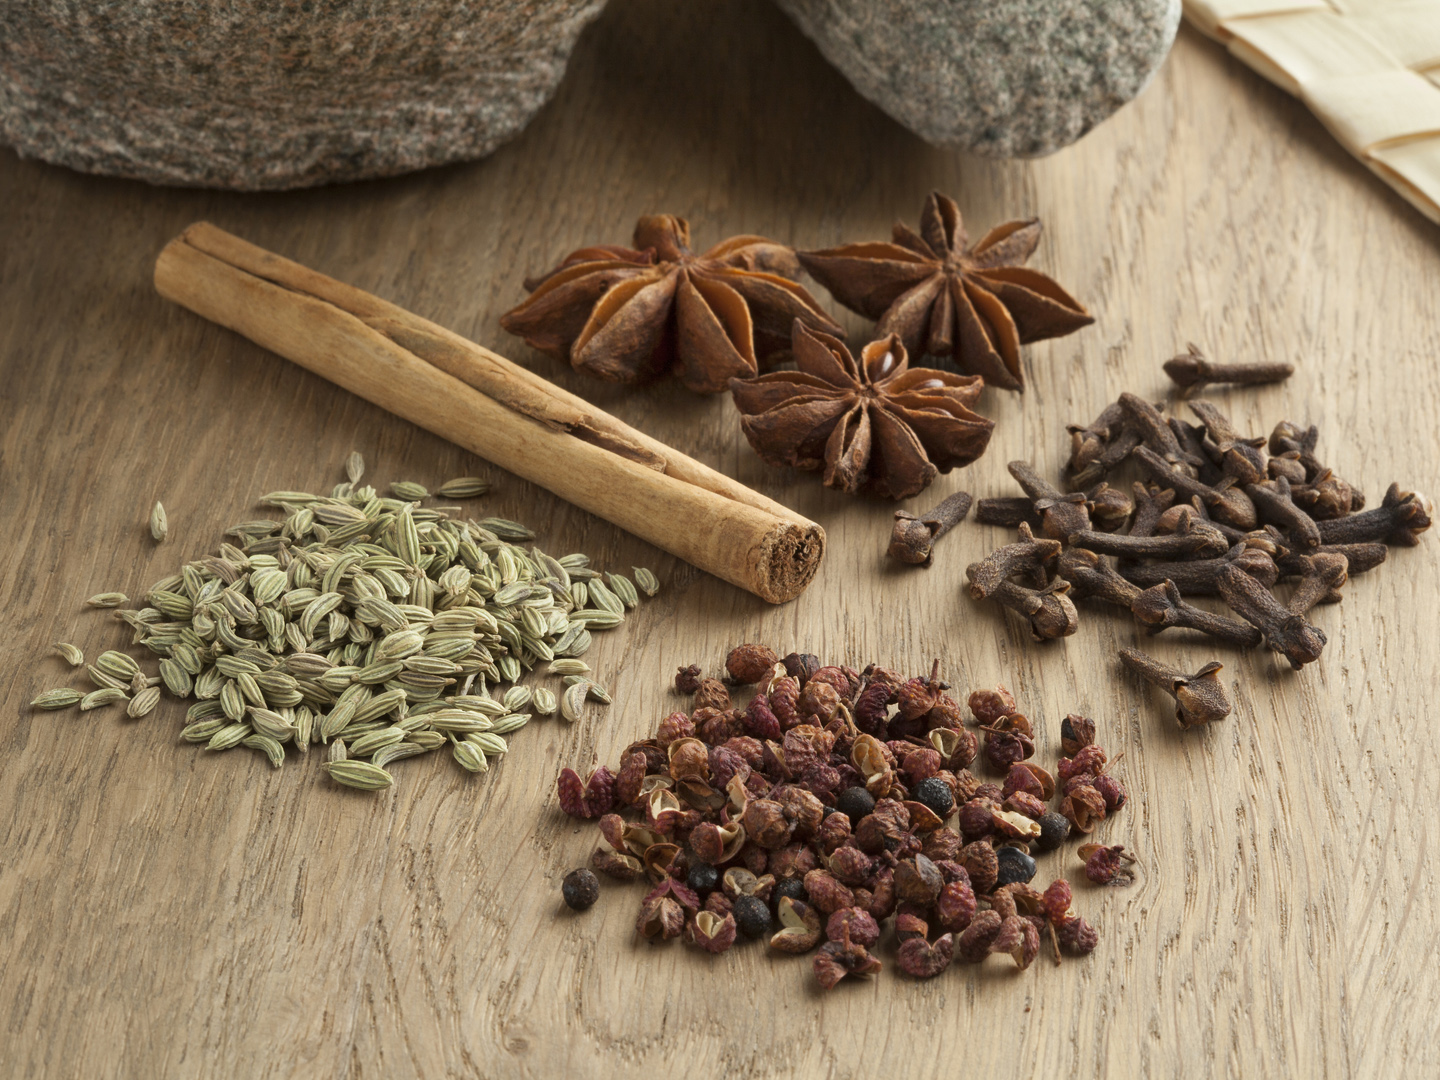 Cooking With Spices: Chinese Five-Spice Powder - Dr. Weil's Healthy Kitchen